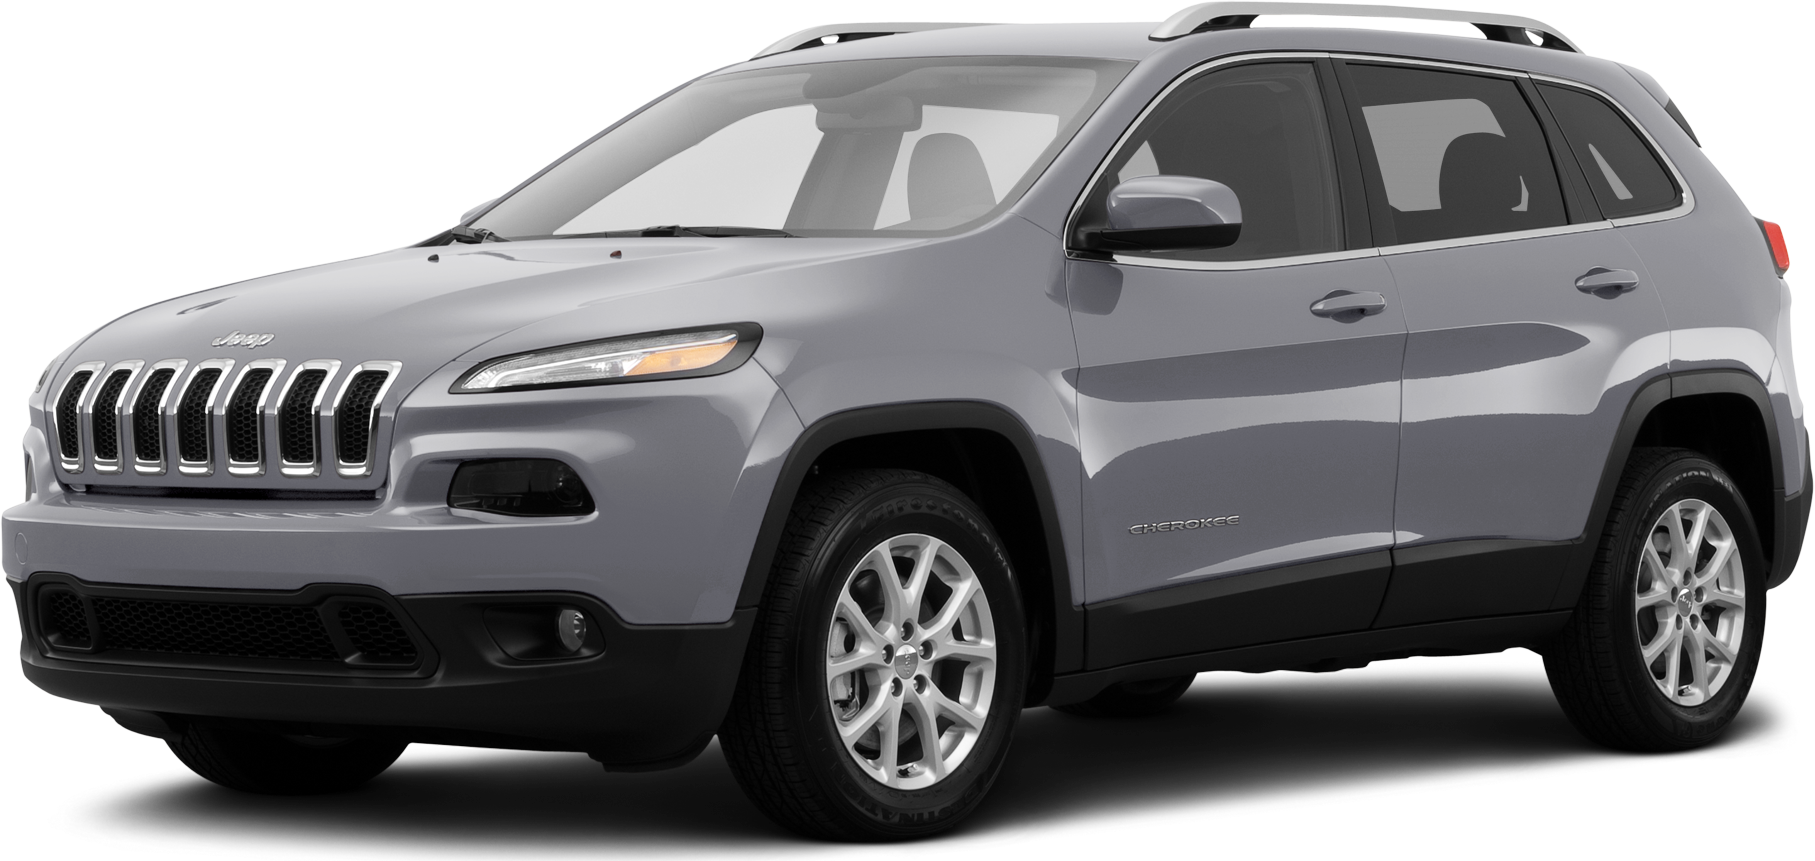 2014 Jeep Cherokee Price Value Ratings And Reviews Kelley Blue Book